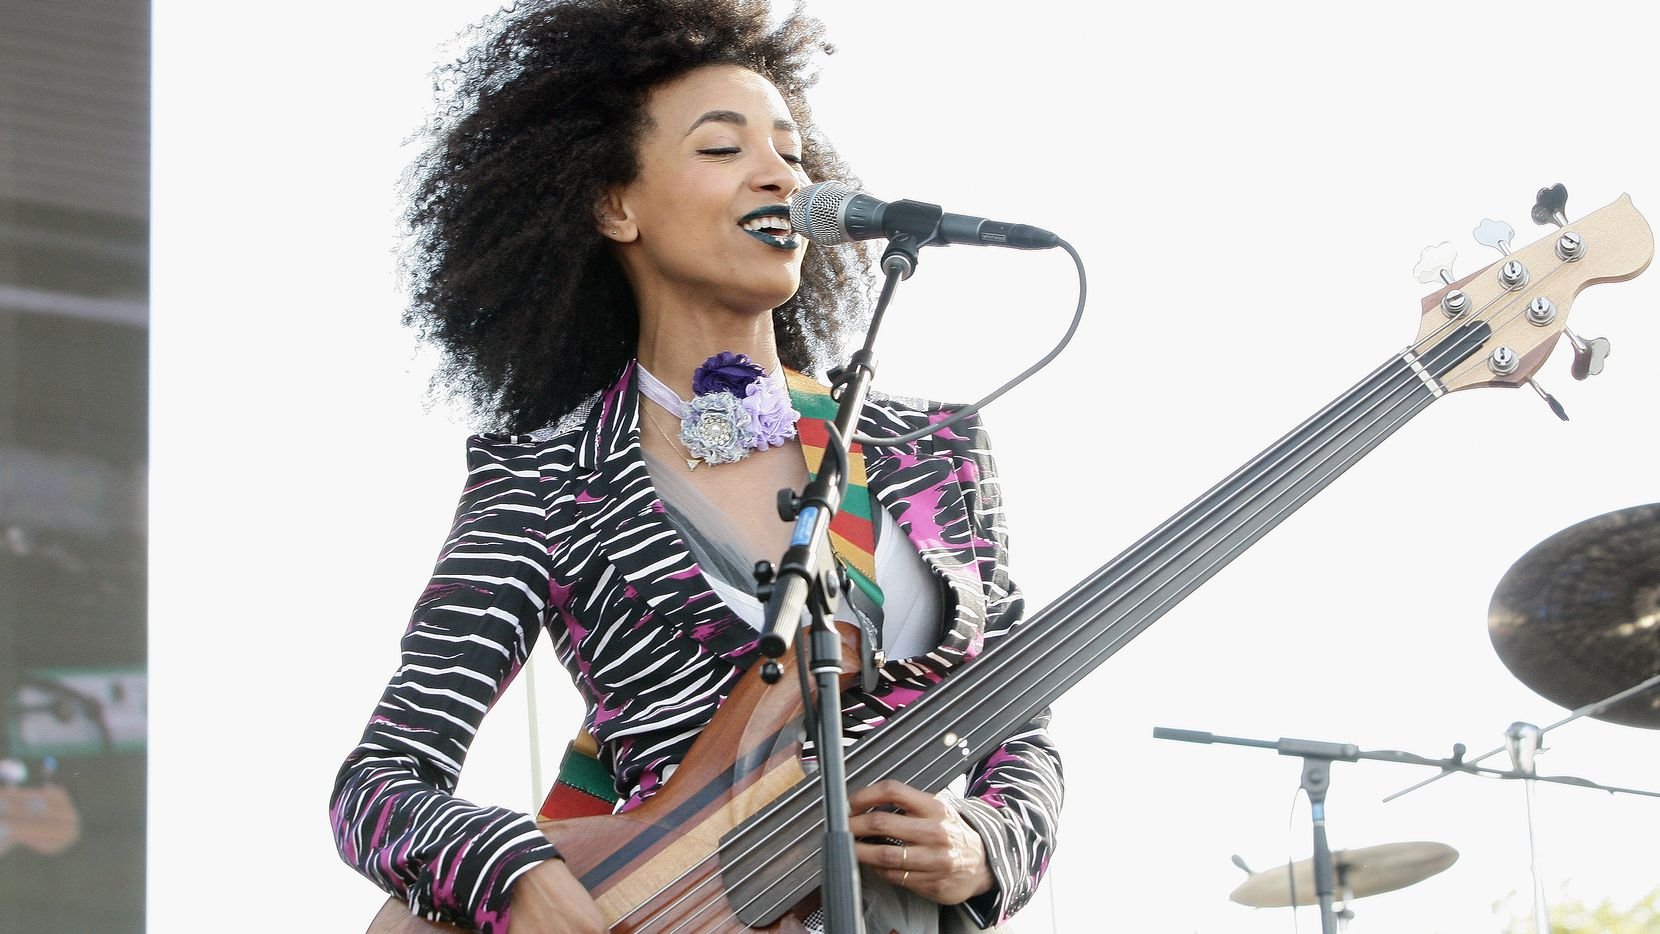 Lest We Forget by Esperanza Spalding, Voice + Piano + Guitars + Bass